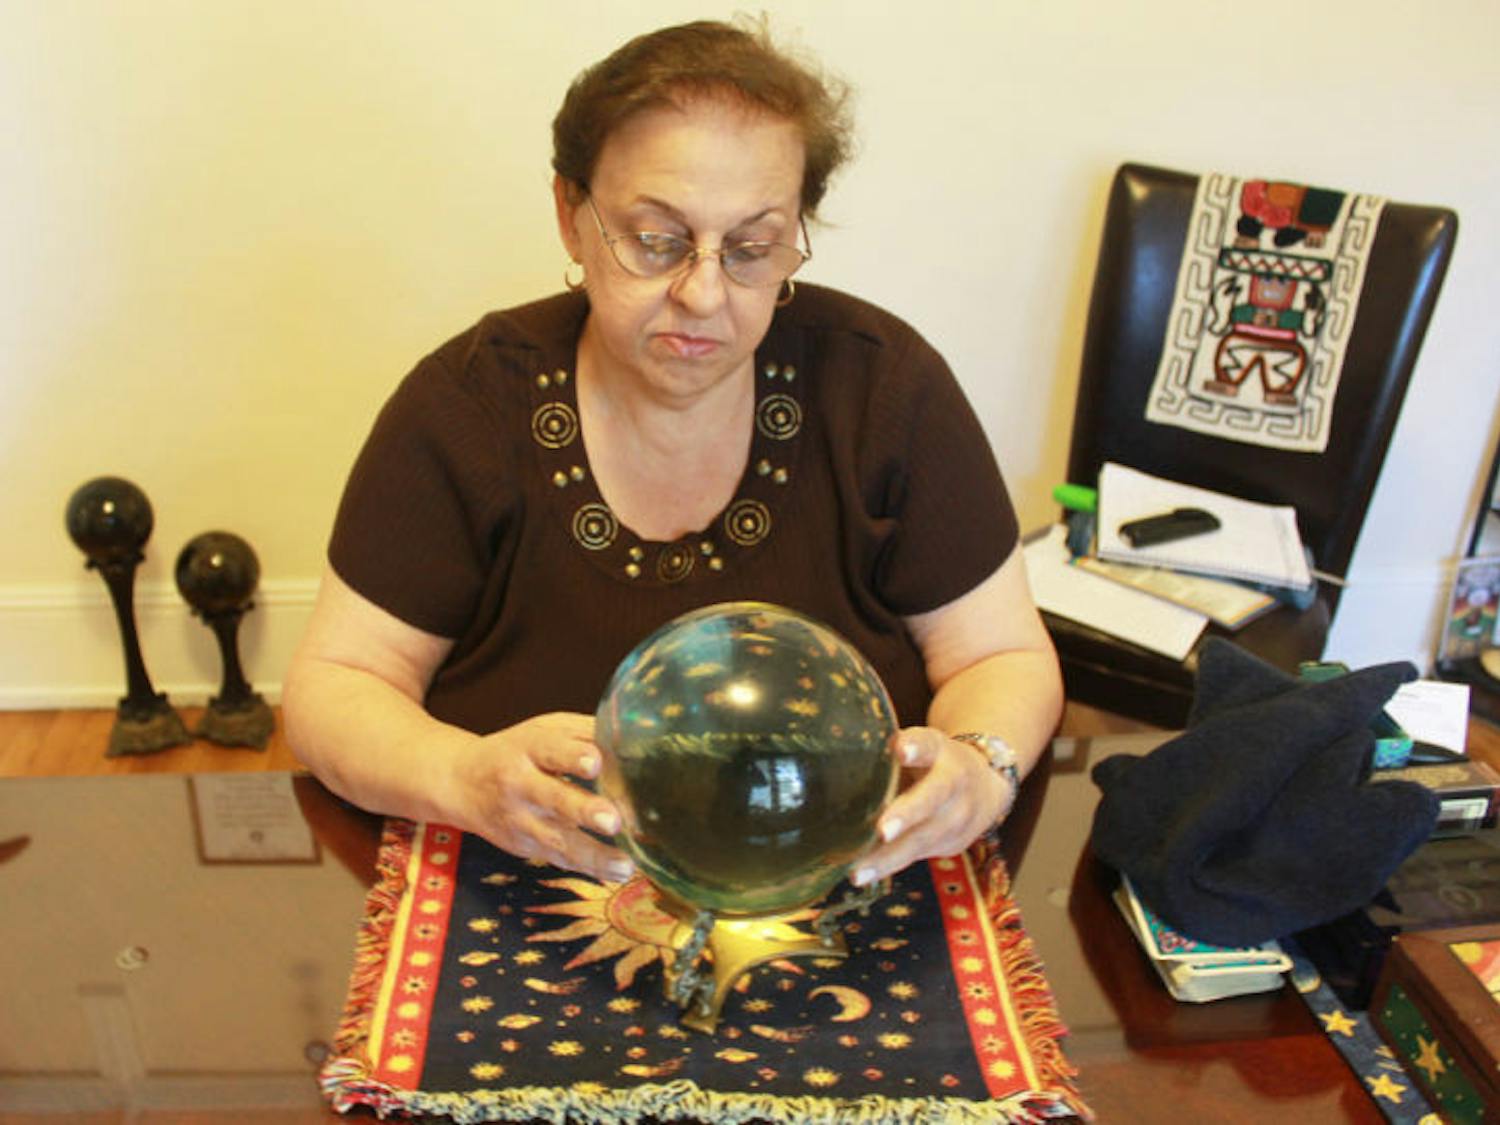 Adviser and psychic reader Theresa Mitchell looks into a crystal ball in her home at 834 E. University Ave.